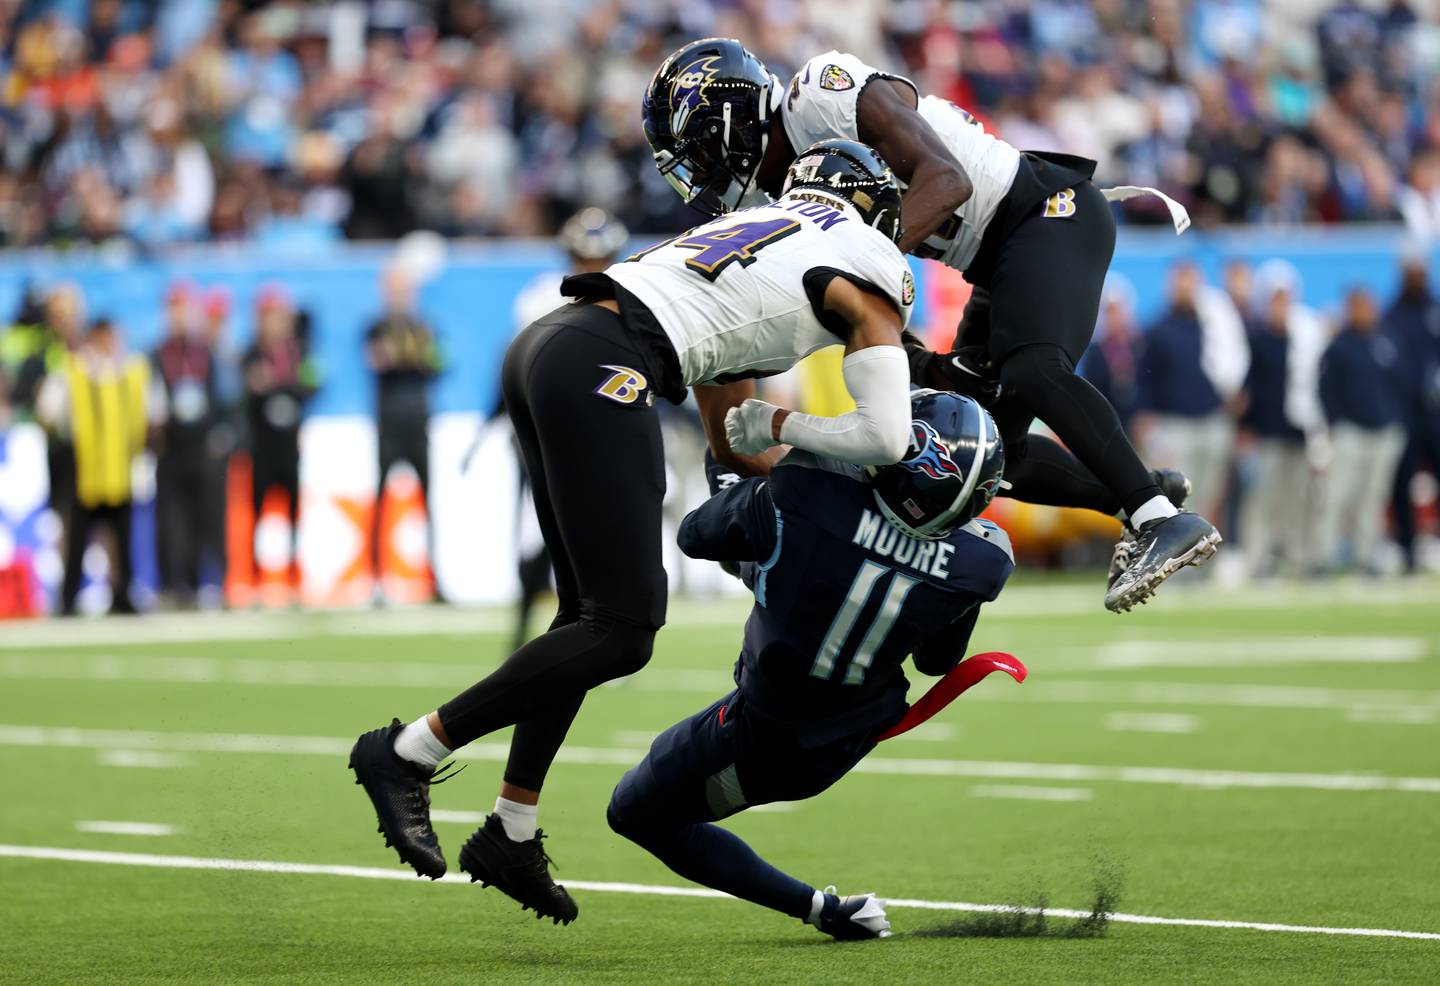 LONDON, ENGLAND - OCTOBER 15: Chris Moore #11 of the Tennessee Titans is fouled by Kyle Hamilton #14 of the Baltimore Ravens in the third quarter during the 2023 NFL London Games match between Baltimore Ravens and Tennessee Titans at Tottenham Hotspur Stadium on October 15, 2023 in London, England. (Photo by Ryan Pierse/Getty Images)